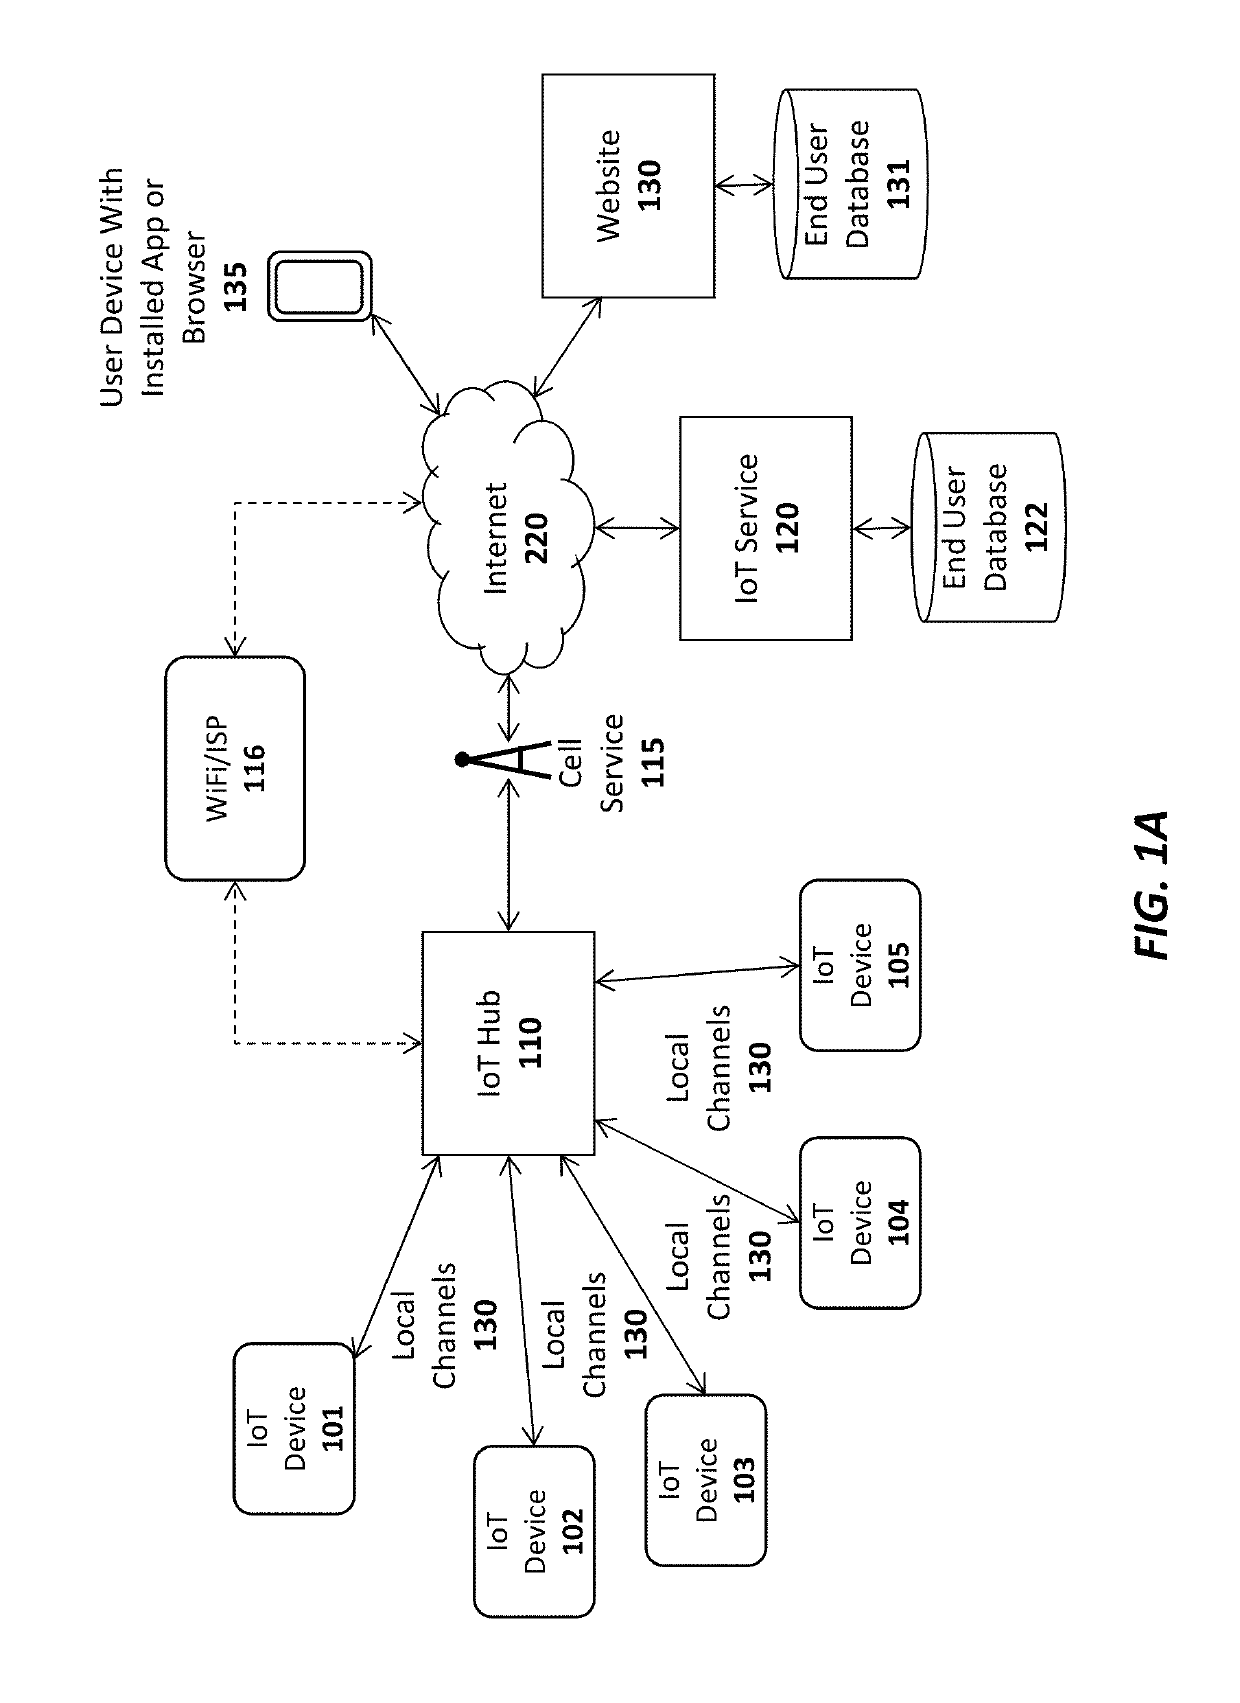 System and method for securely configuring a new device with network credentials